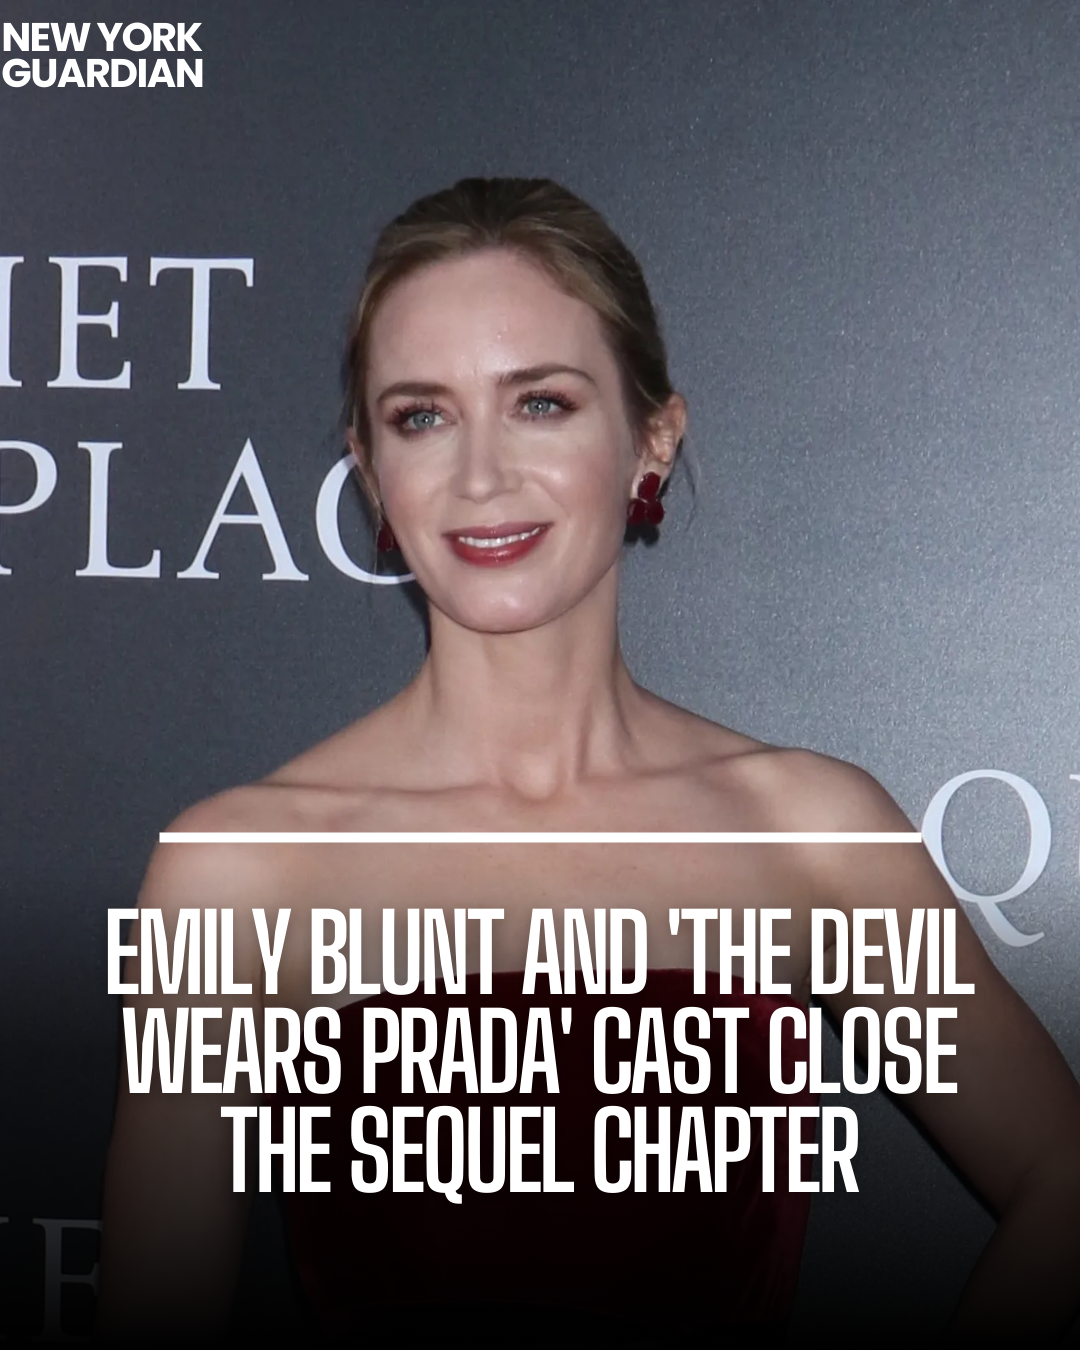 Emily Blunt and other members of The Devil Wears Prada's team have denied rumours of a sequel